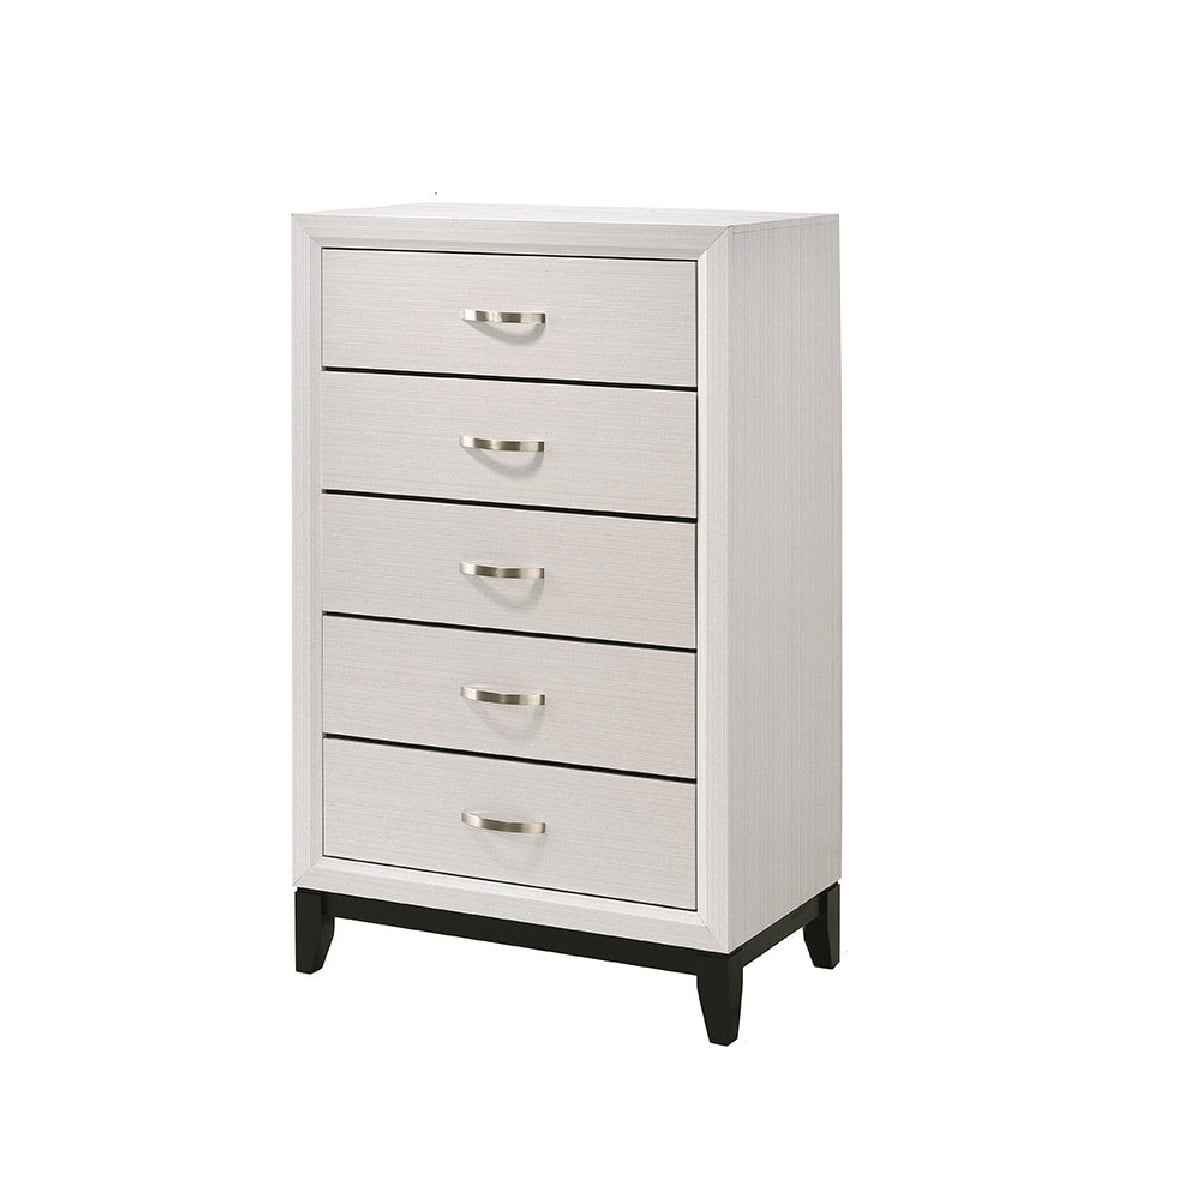 Picture of Benjara BM215345 Transitional 5 Drawer Chest with Curved Handle & Chamfered Feet - White - 50.4 x 16.4 x 31.1 in.